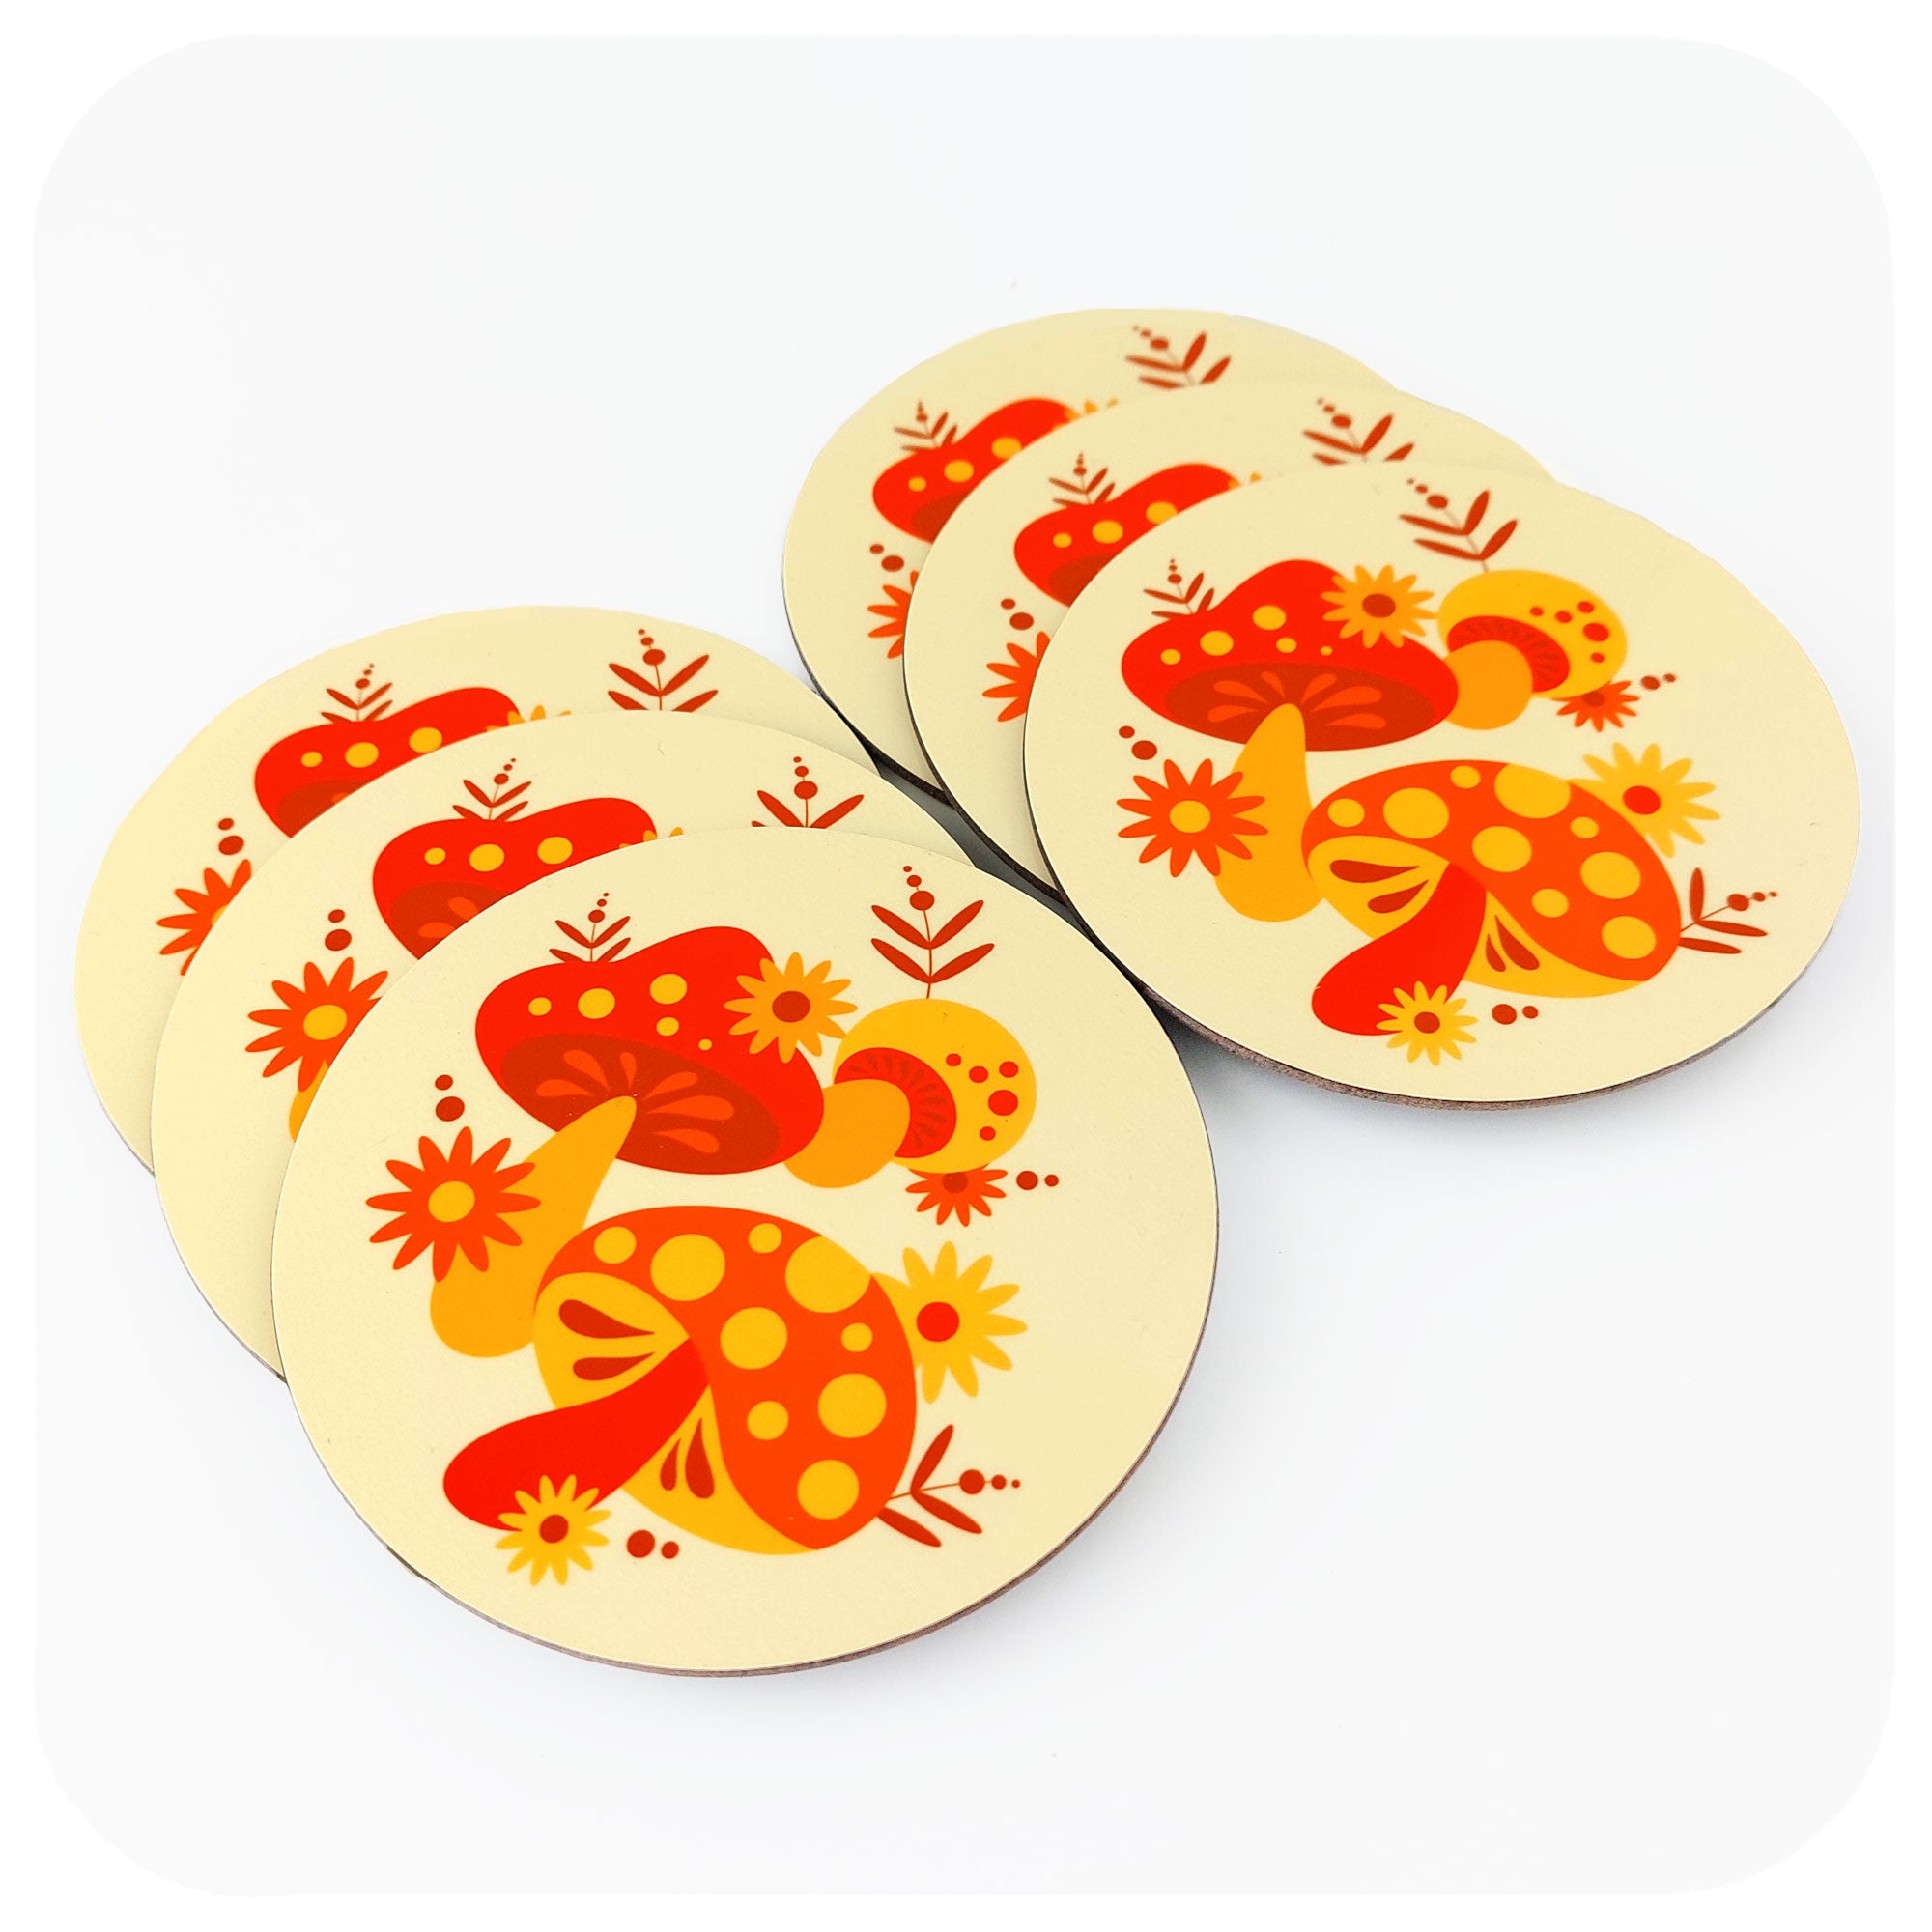 Set of 6 70s style retro coasters featuring orange, red & yellow mushrooms, on a white background | The Inkabilly Emporium